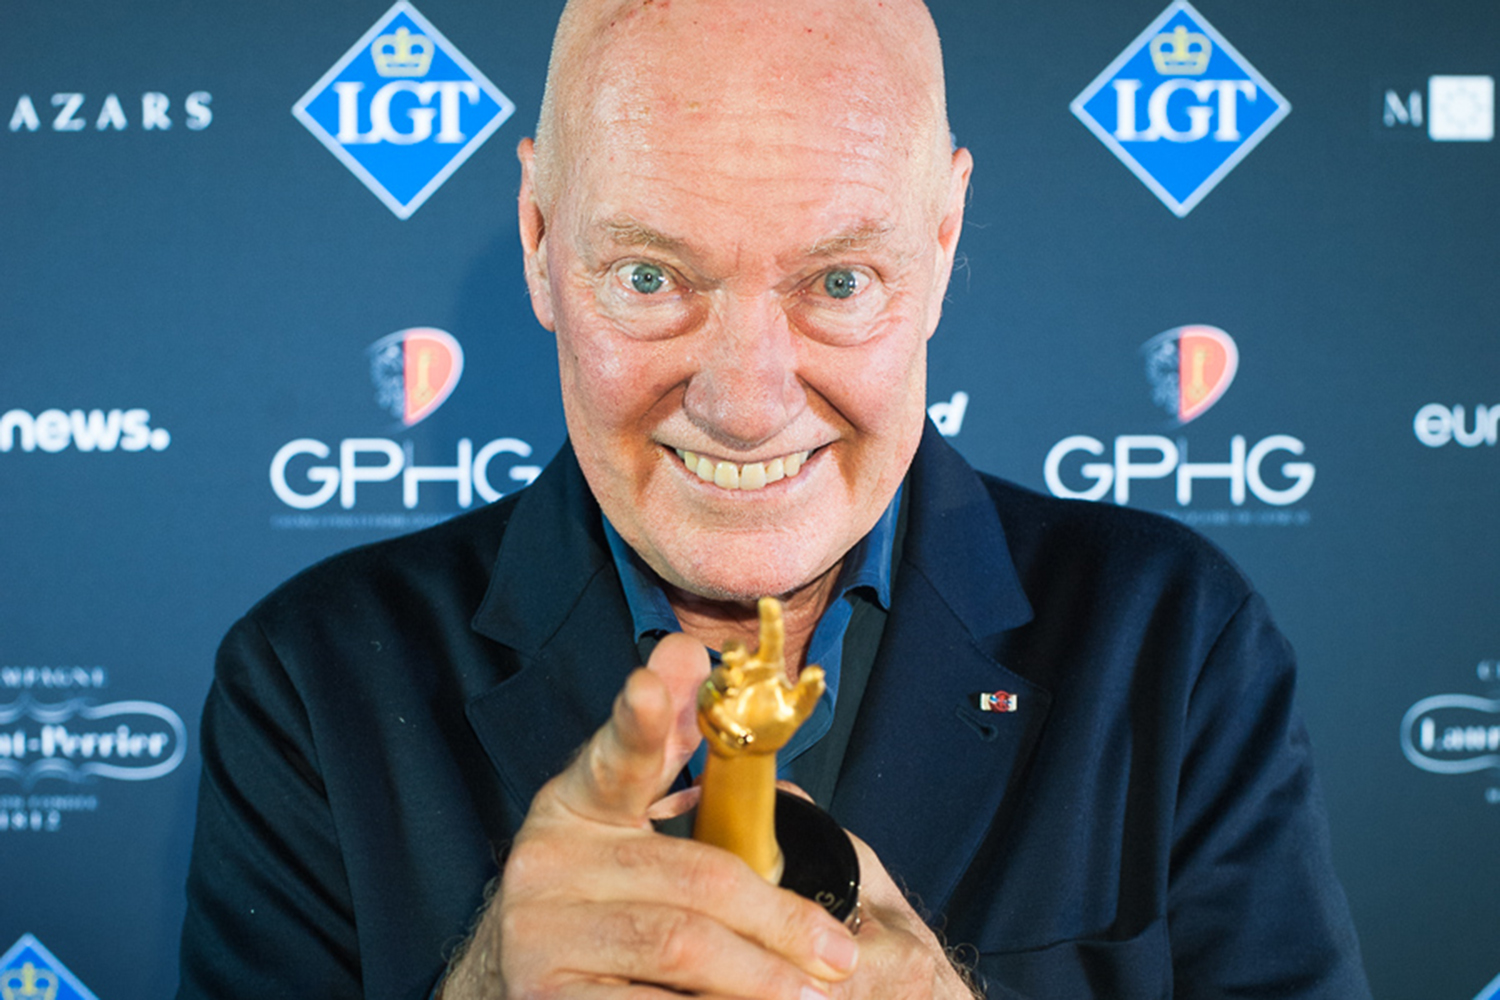 Hackers Abuse Instagram Account Of Jean-Claude Biver